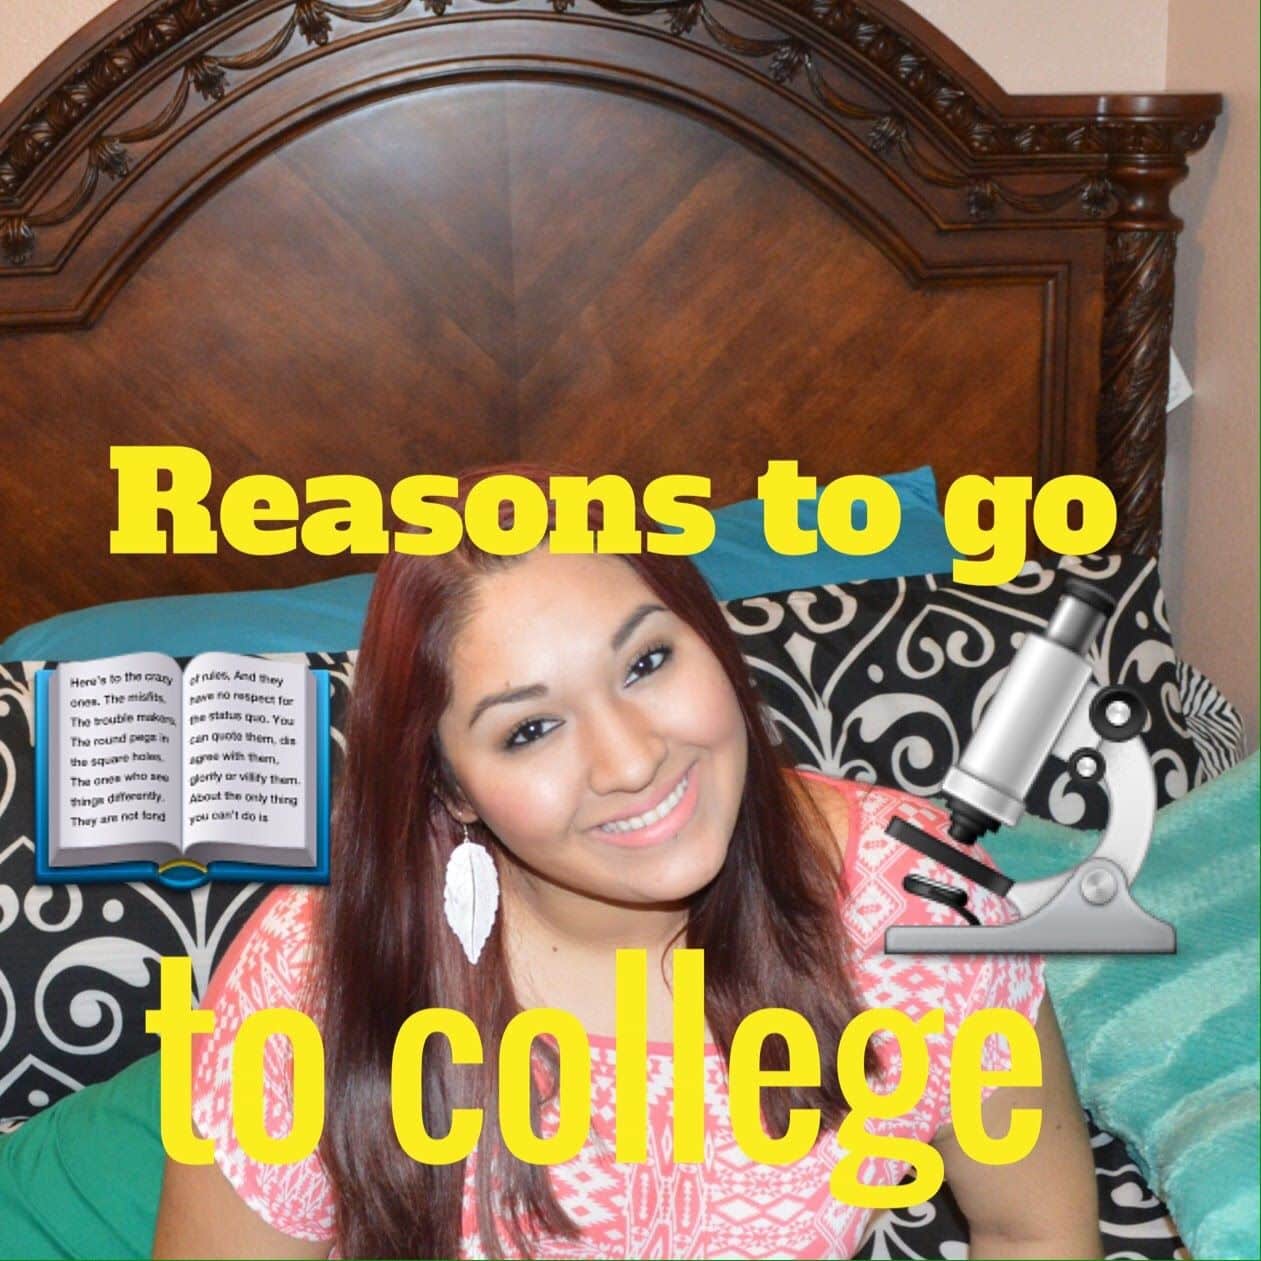 Why should you go to college